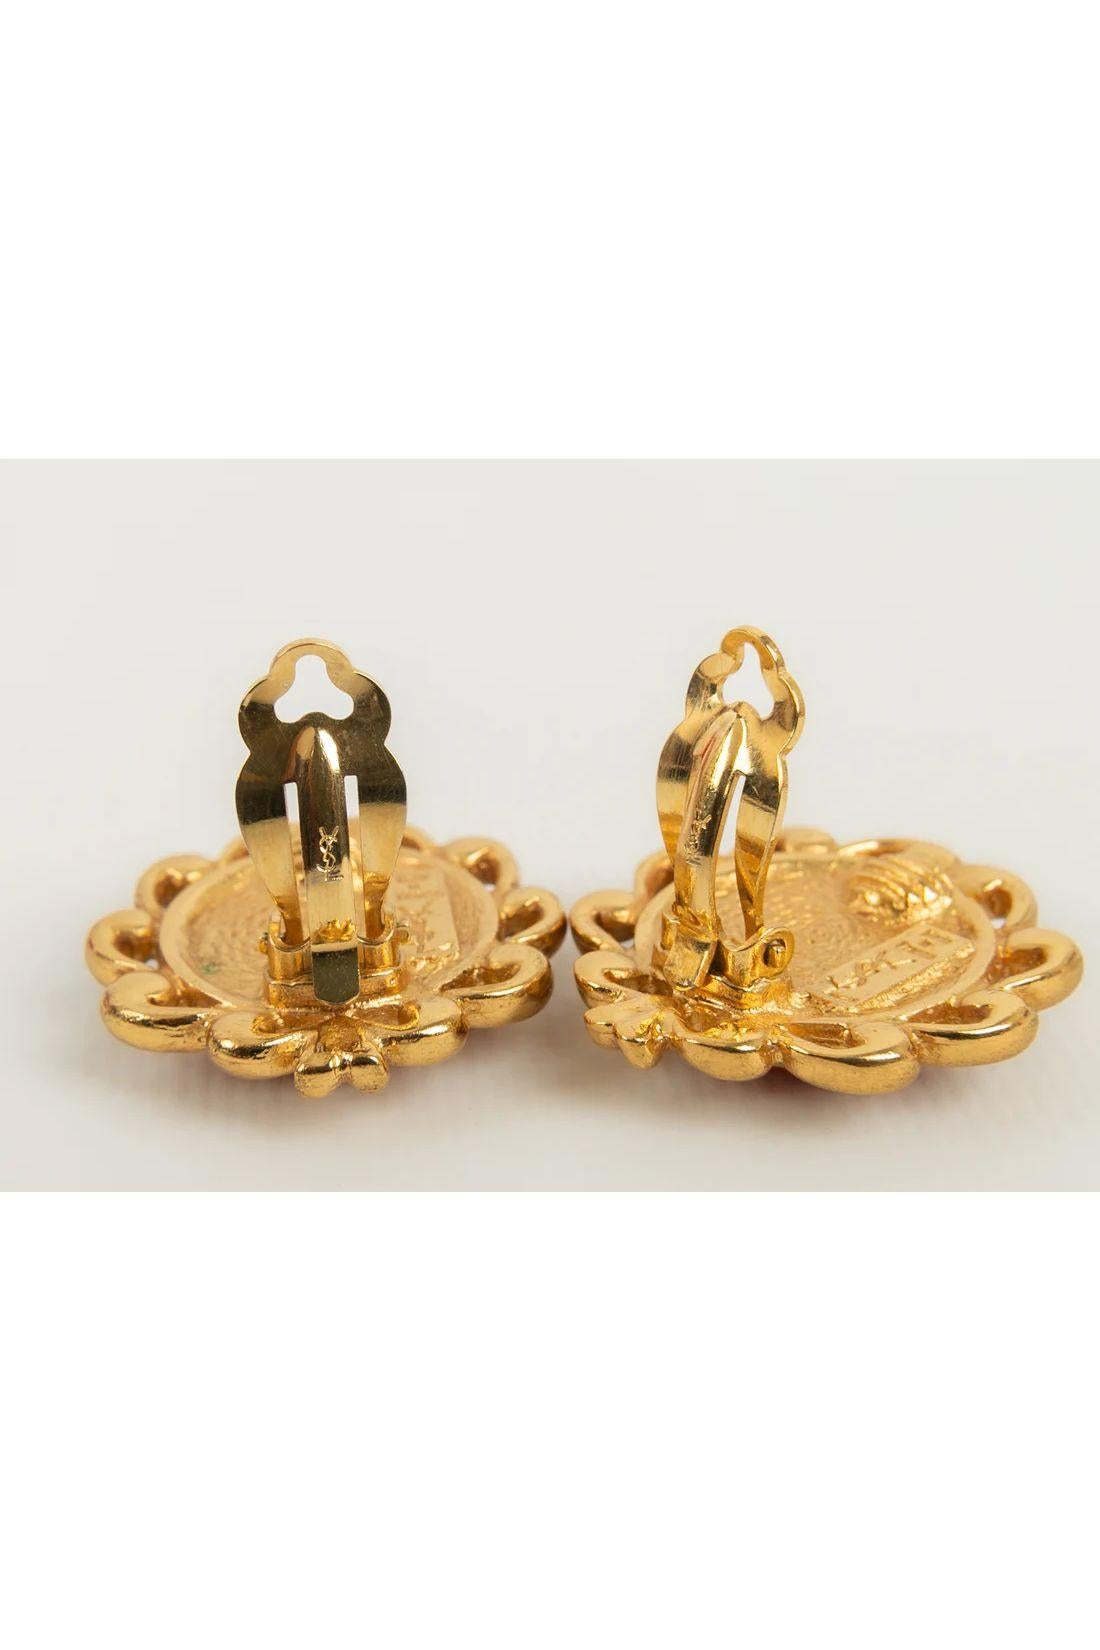 Women's Yves Saint Laurent Earrings in Gold Metal and Red Resin For Sale